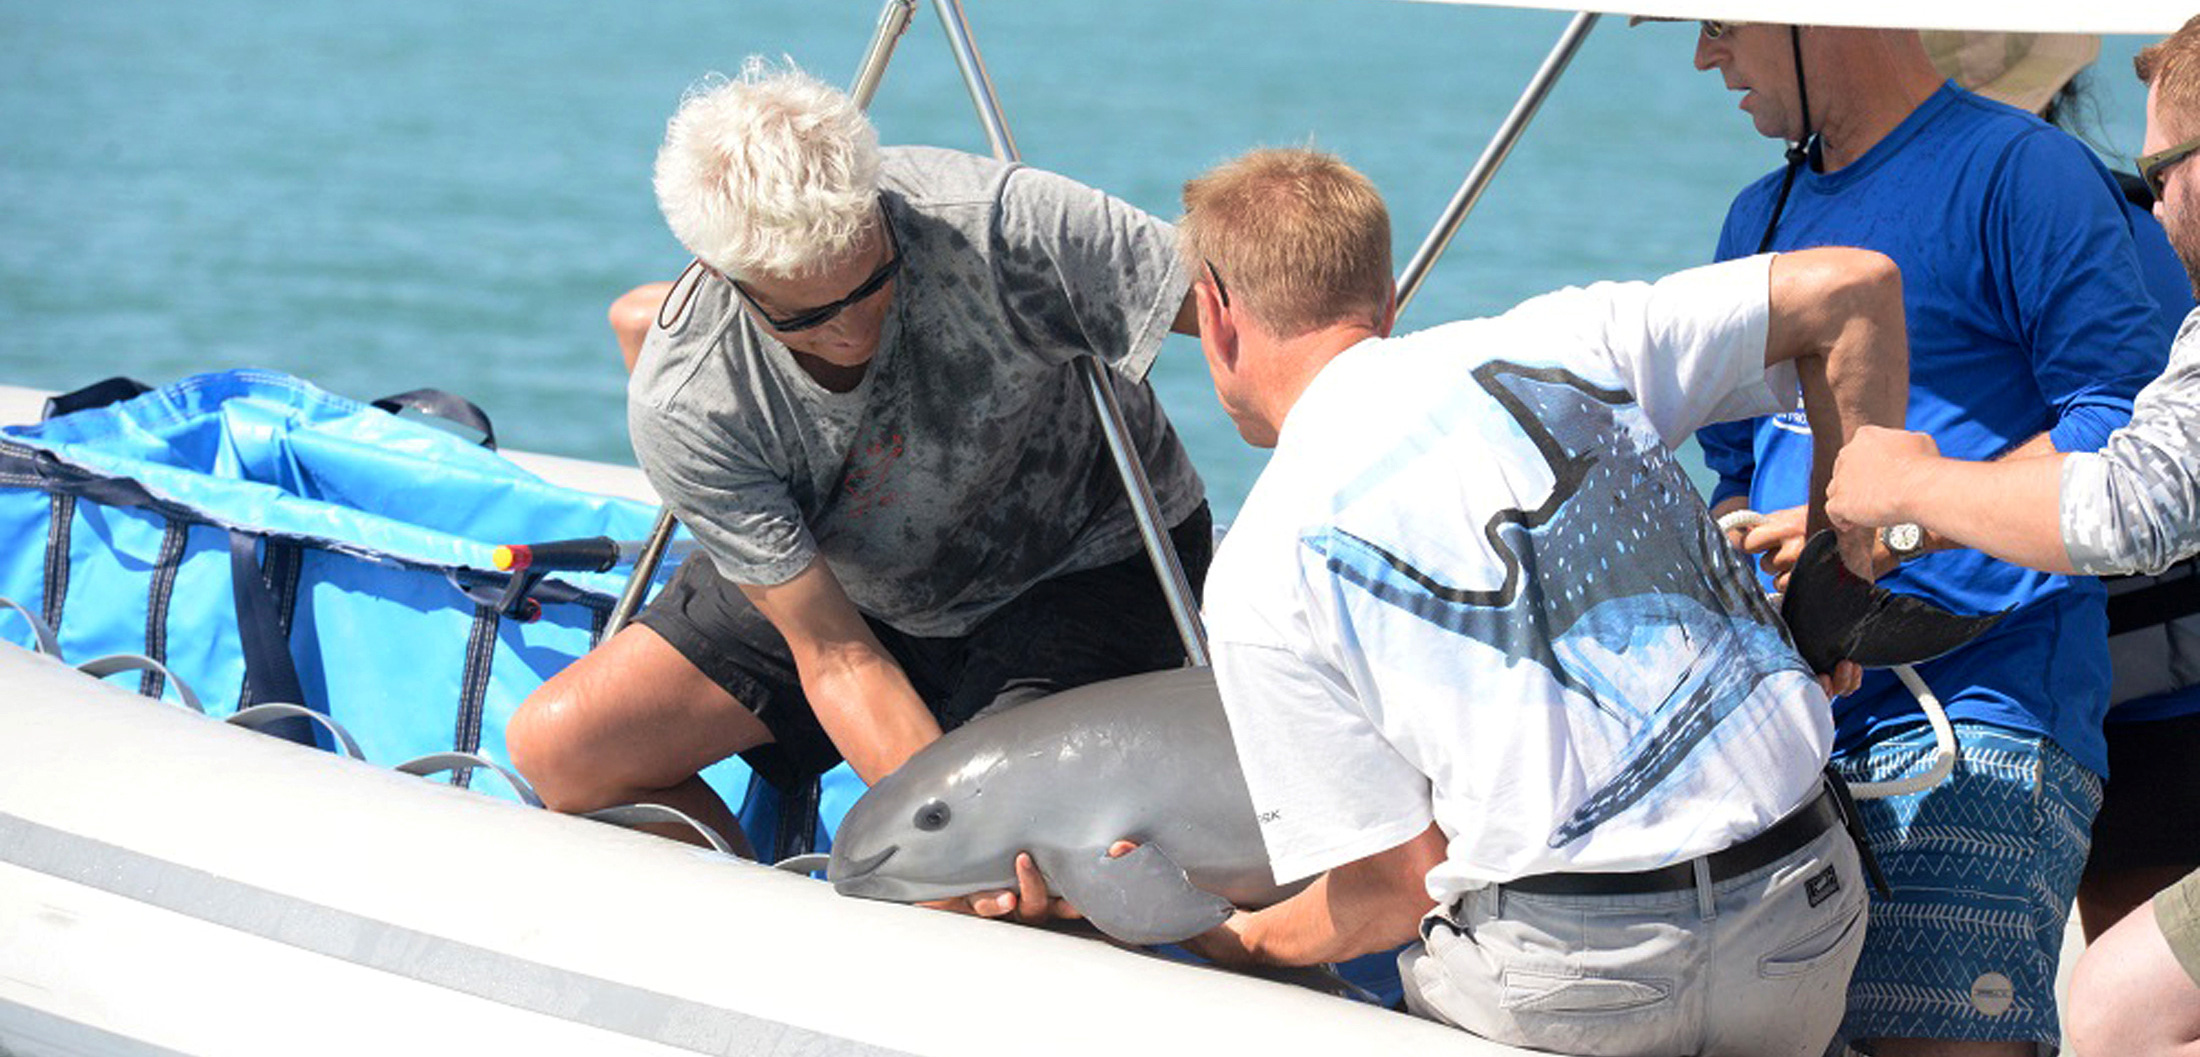 The first vaquita caught by VaquitaCPR—a juvenile—had to be released. The international group was aiming to establish a captive breeding program for the highly endangered porpoise. Photo by Ministry of the Environment and Natural Resources/Reuters